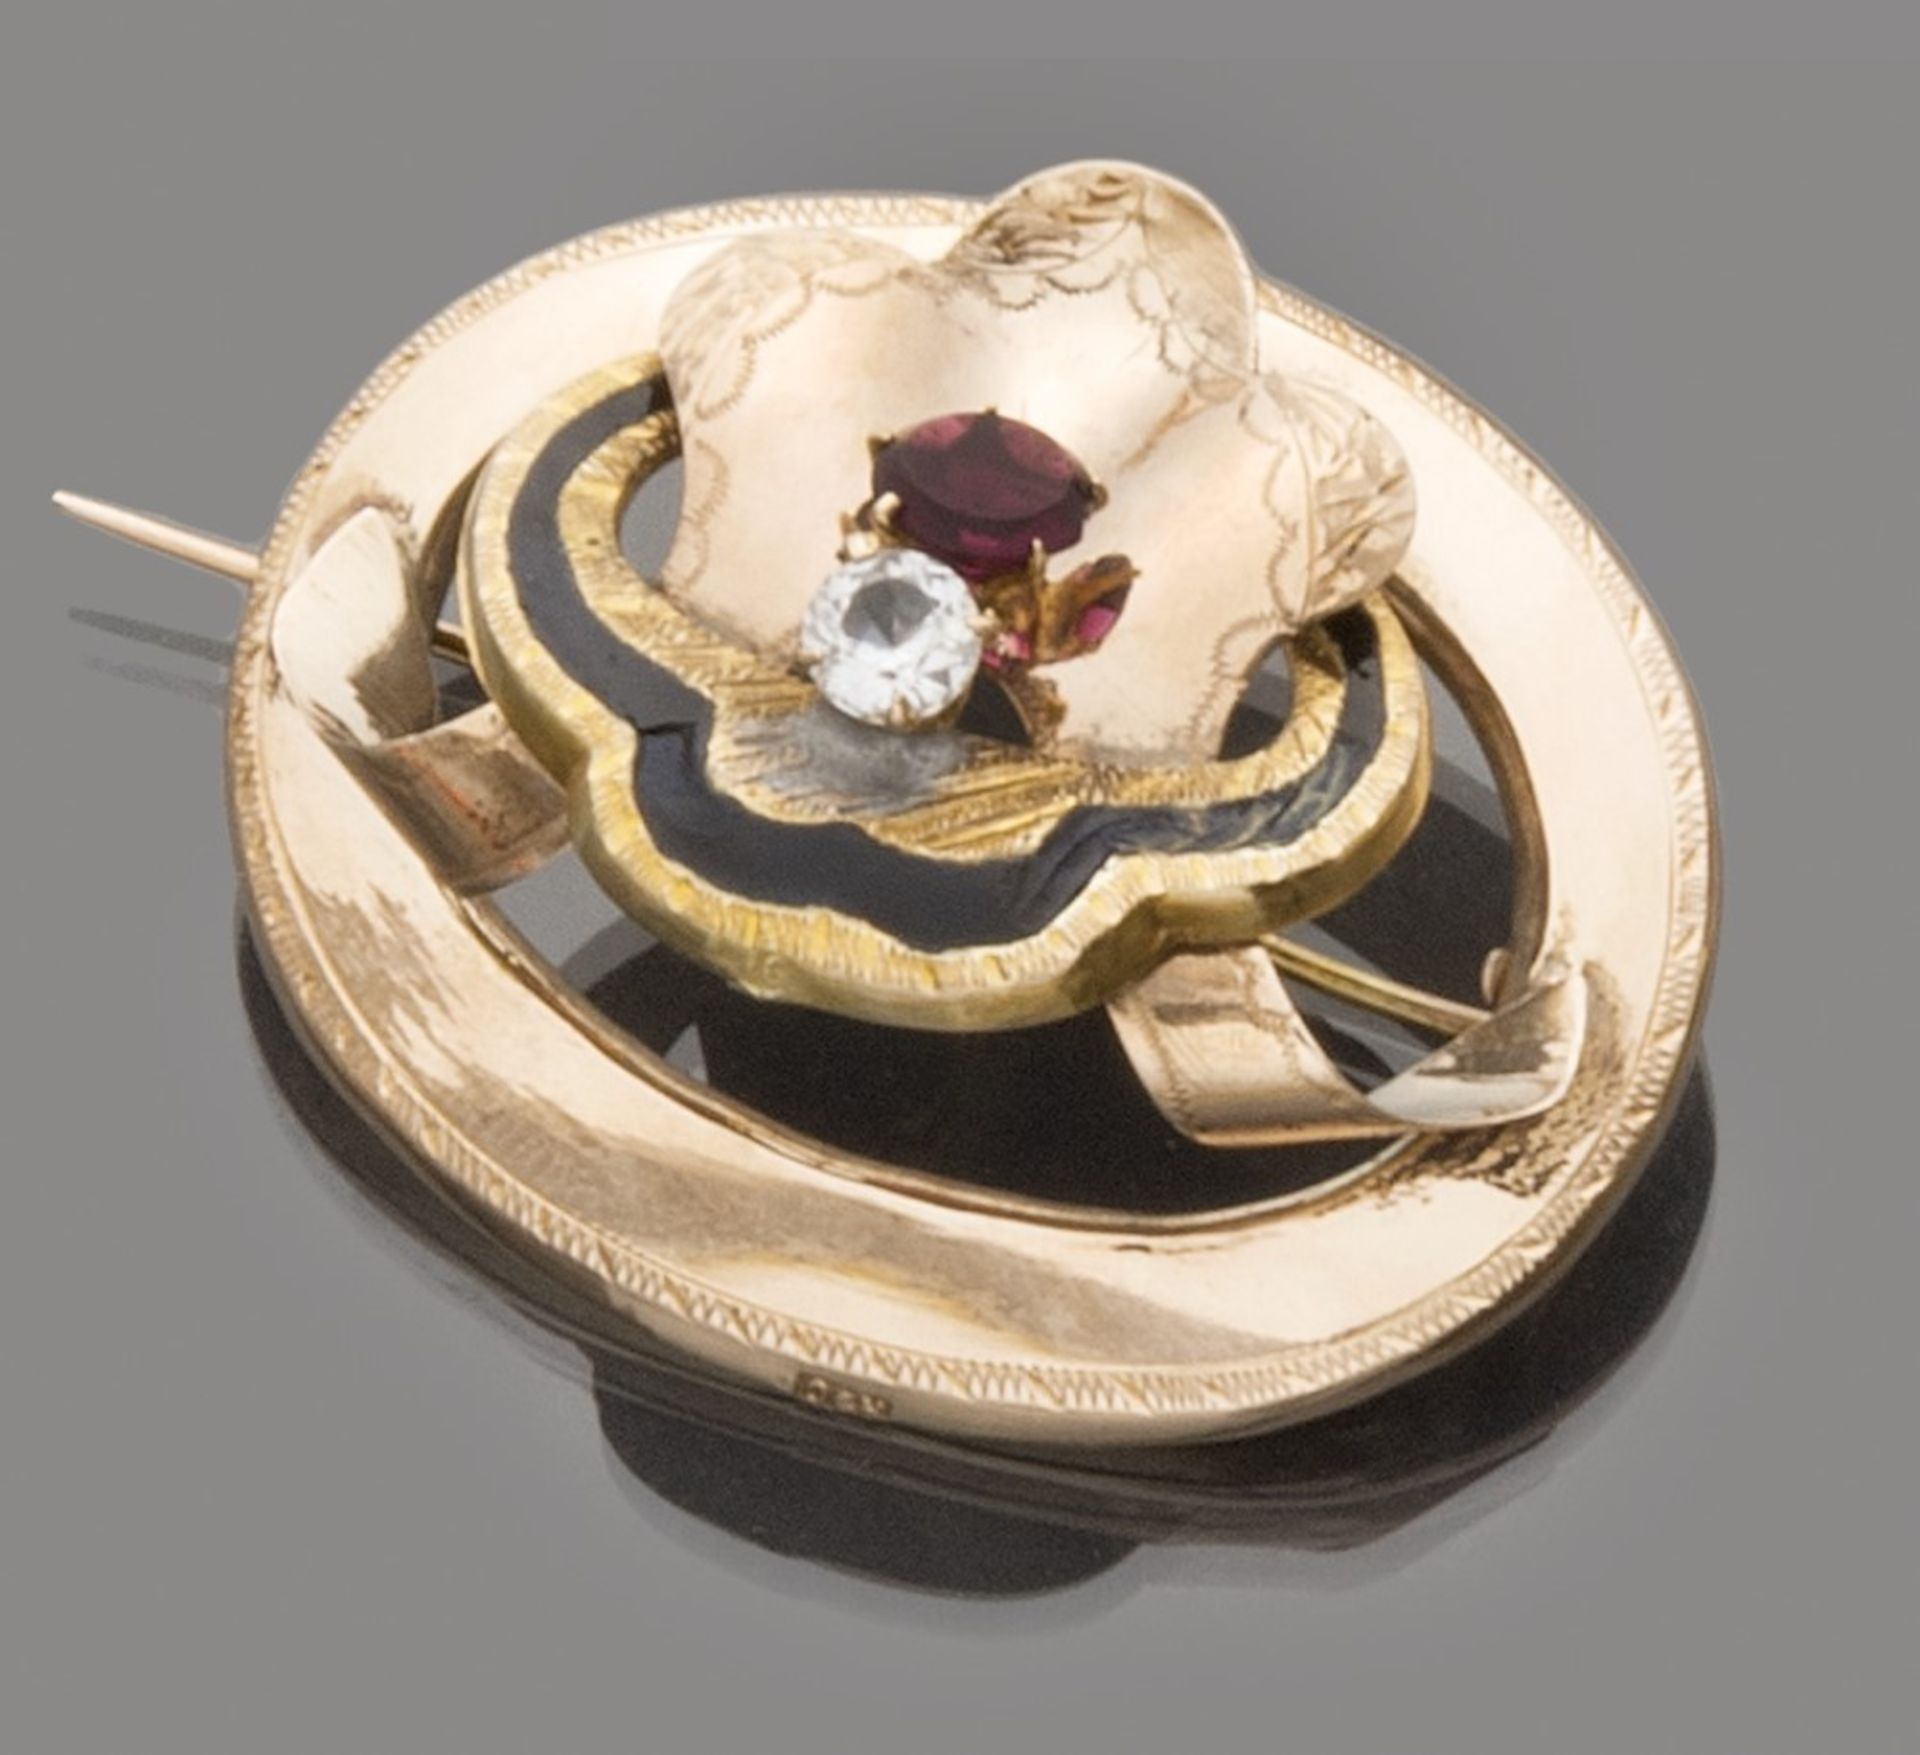 BROOCH in 18 kt yellow gold, oval shaped decorated with zircon and red semiprecious stone.